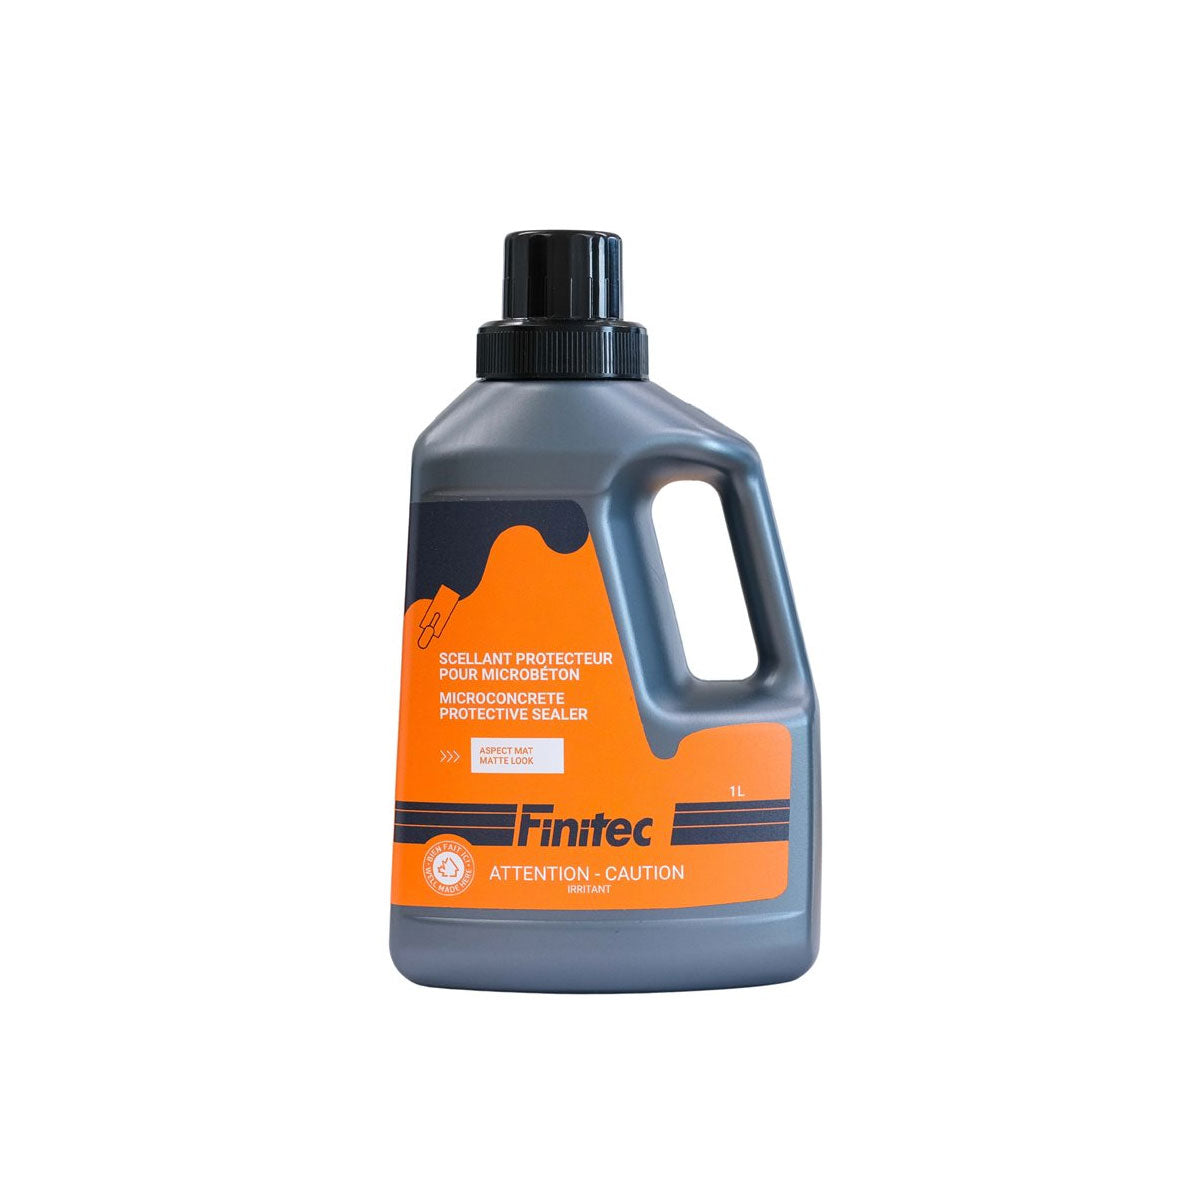 Protective sealer for MicroBéton Finitec wet or matte appearance